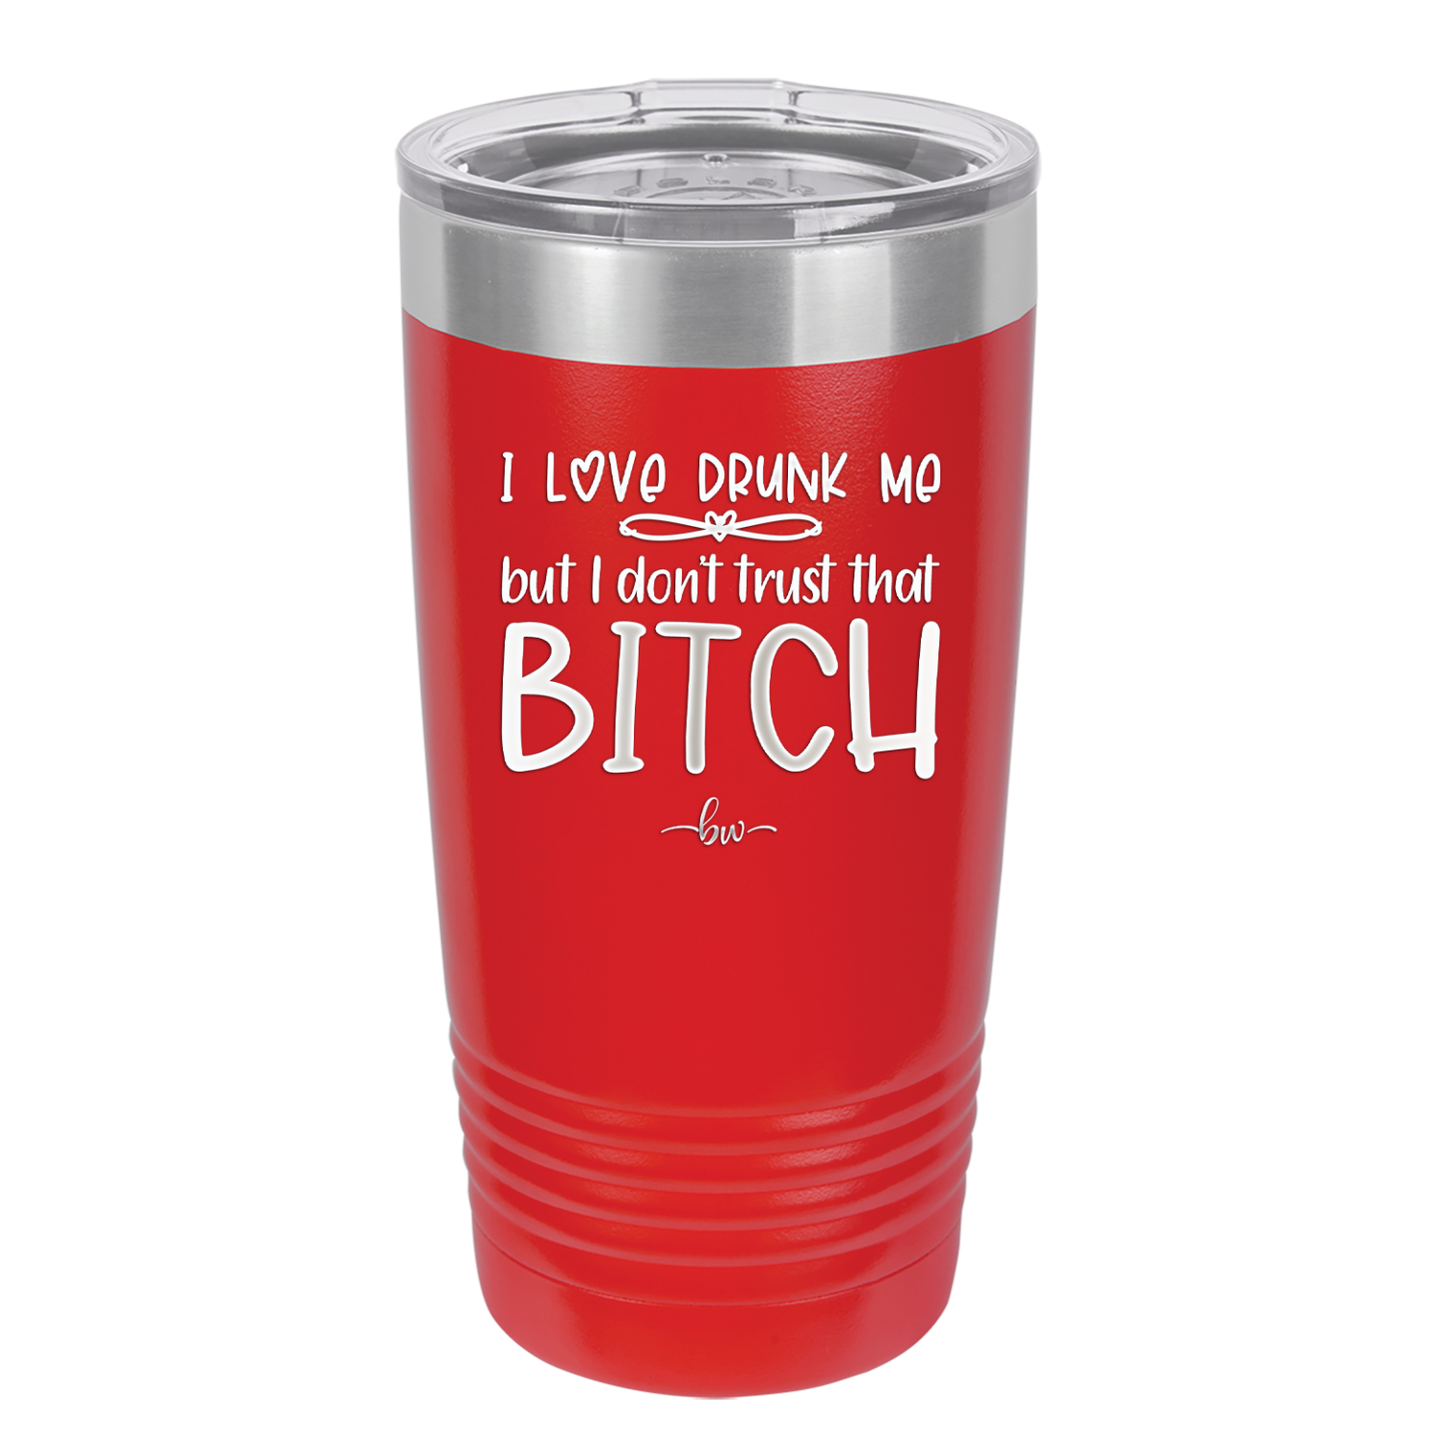 I Love Drunk Me But I Don't Trust That Bitch - Laser Engraved Stainless Steel Drinkware - 2454 -